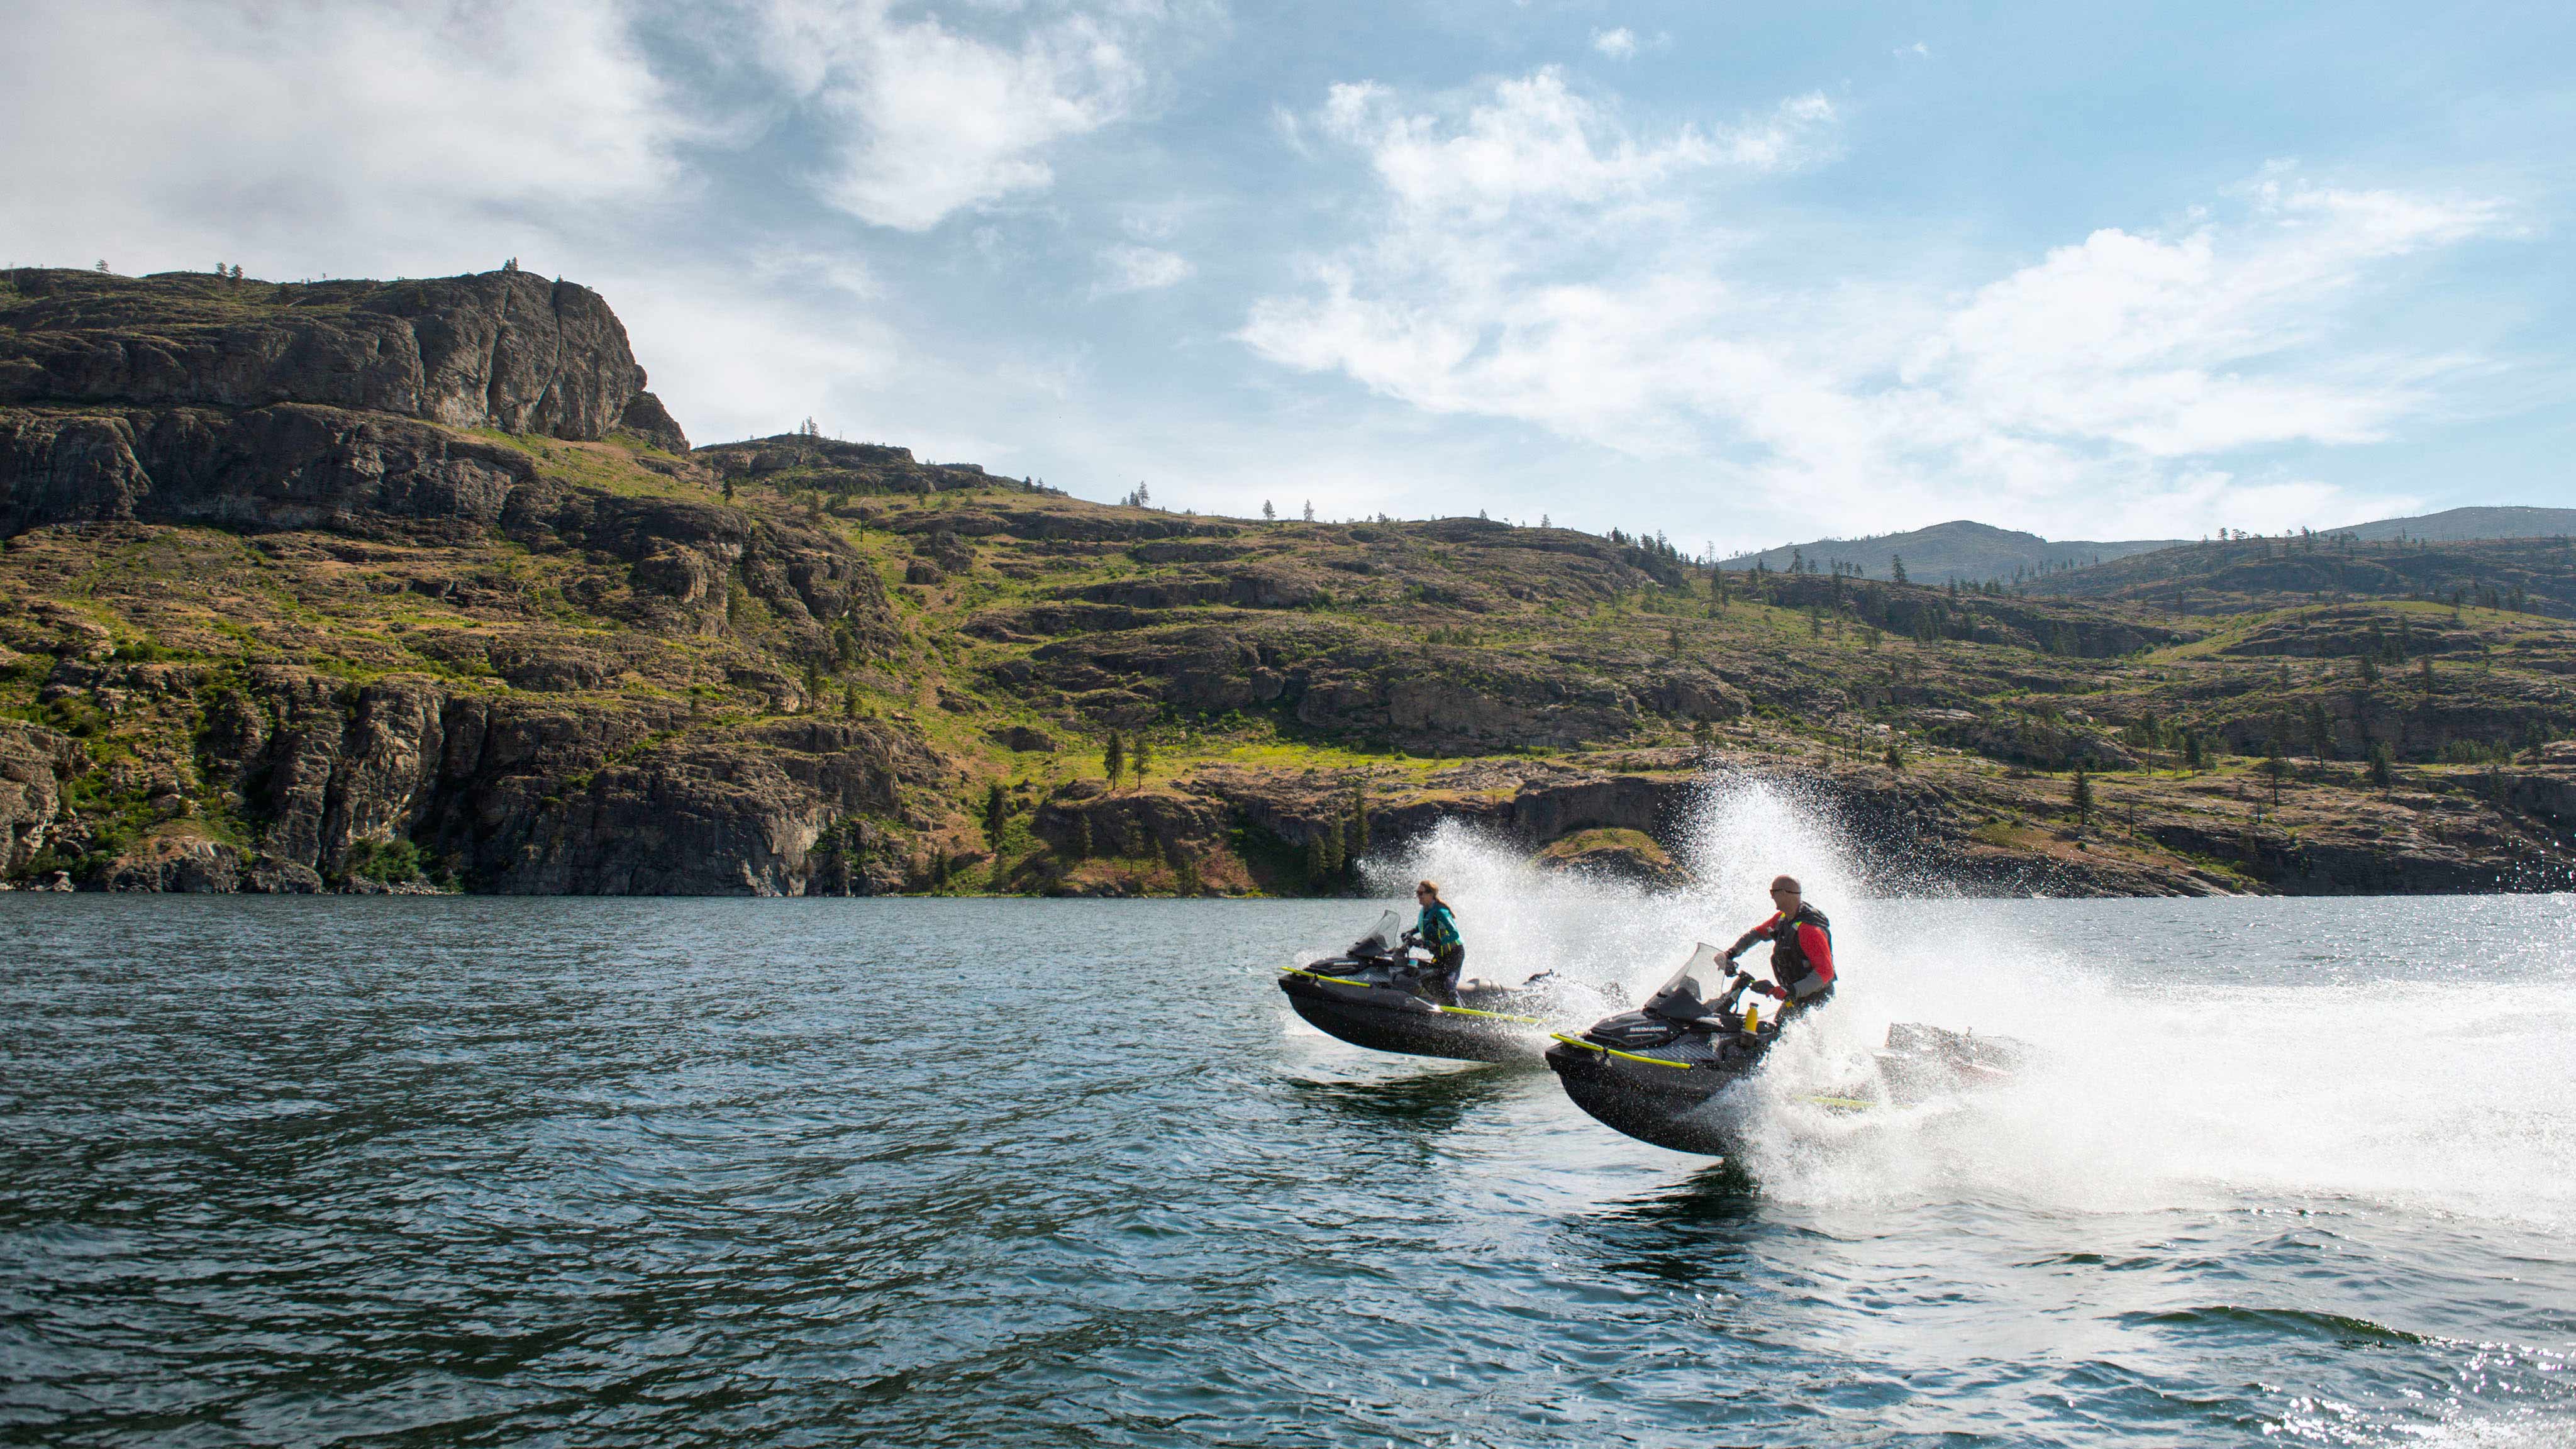 Two riders driving the new Sea-Doo Explorer Pro